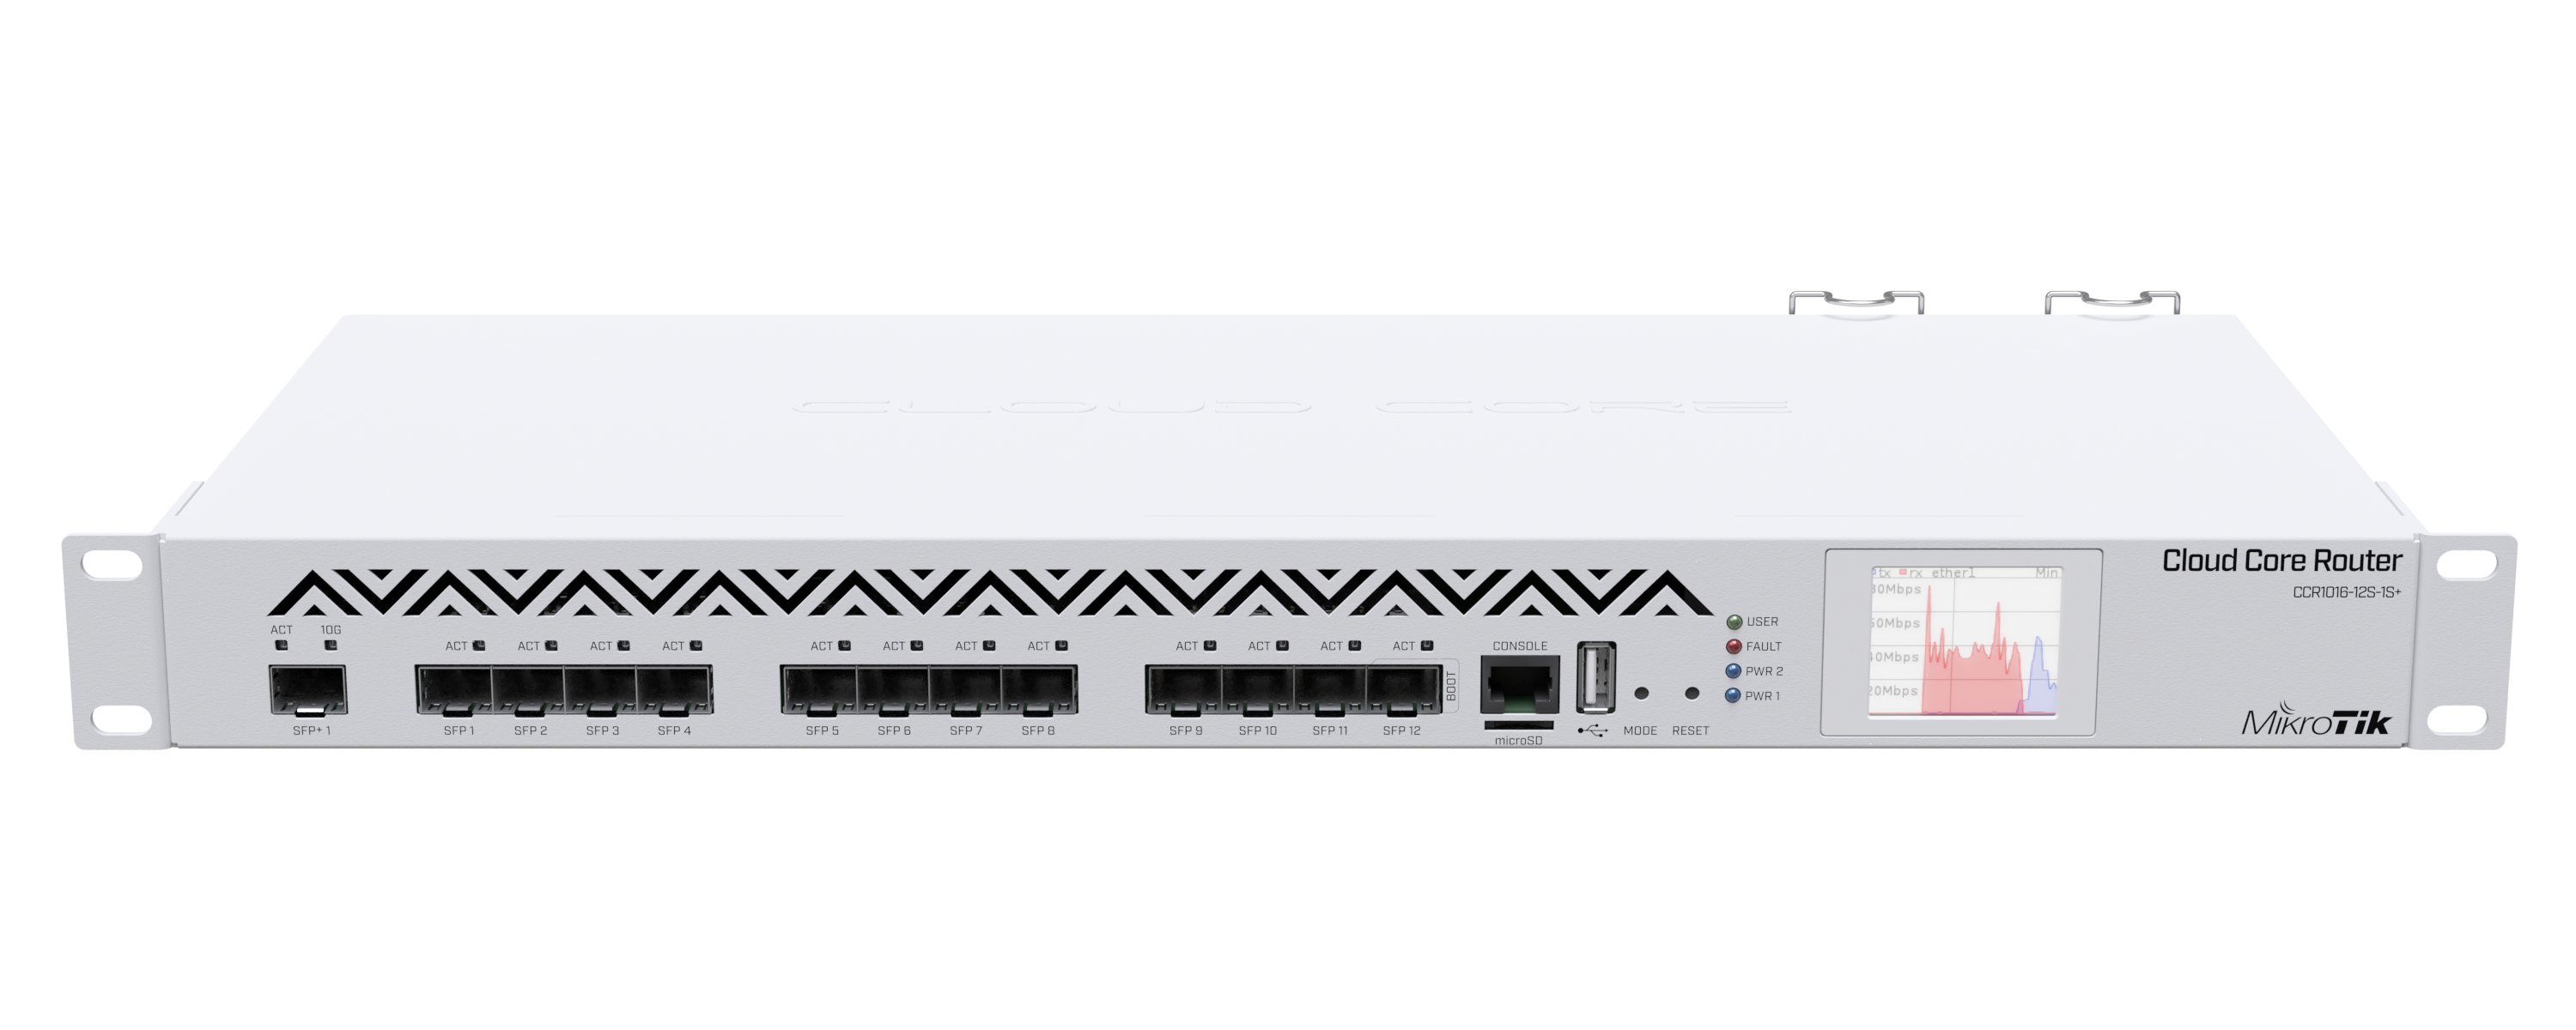 CCR1016-12S-1S+	Cloud Core Router 1016-12S-1S+ with Tilera Tile-Gx16 CPU (16-cores, 1.2Ghz per core), 2GB RAM, 12xSFP cages, 1xSFP+ cage, RouterOS L6, 1U rackmount case, Dual PSU, LCD panel.